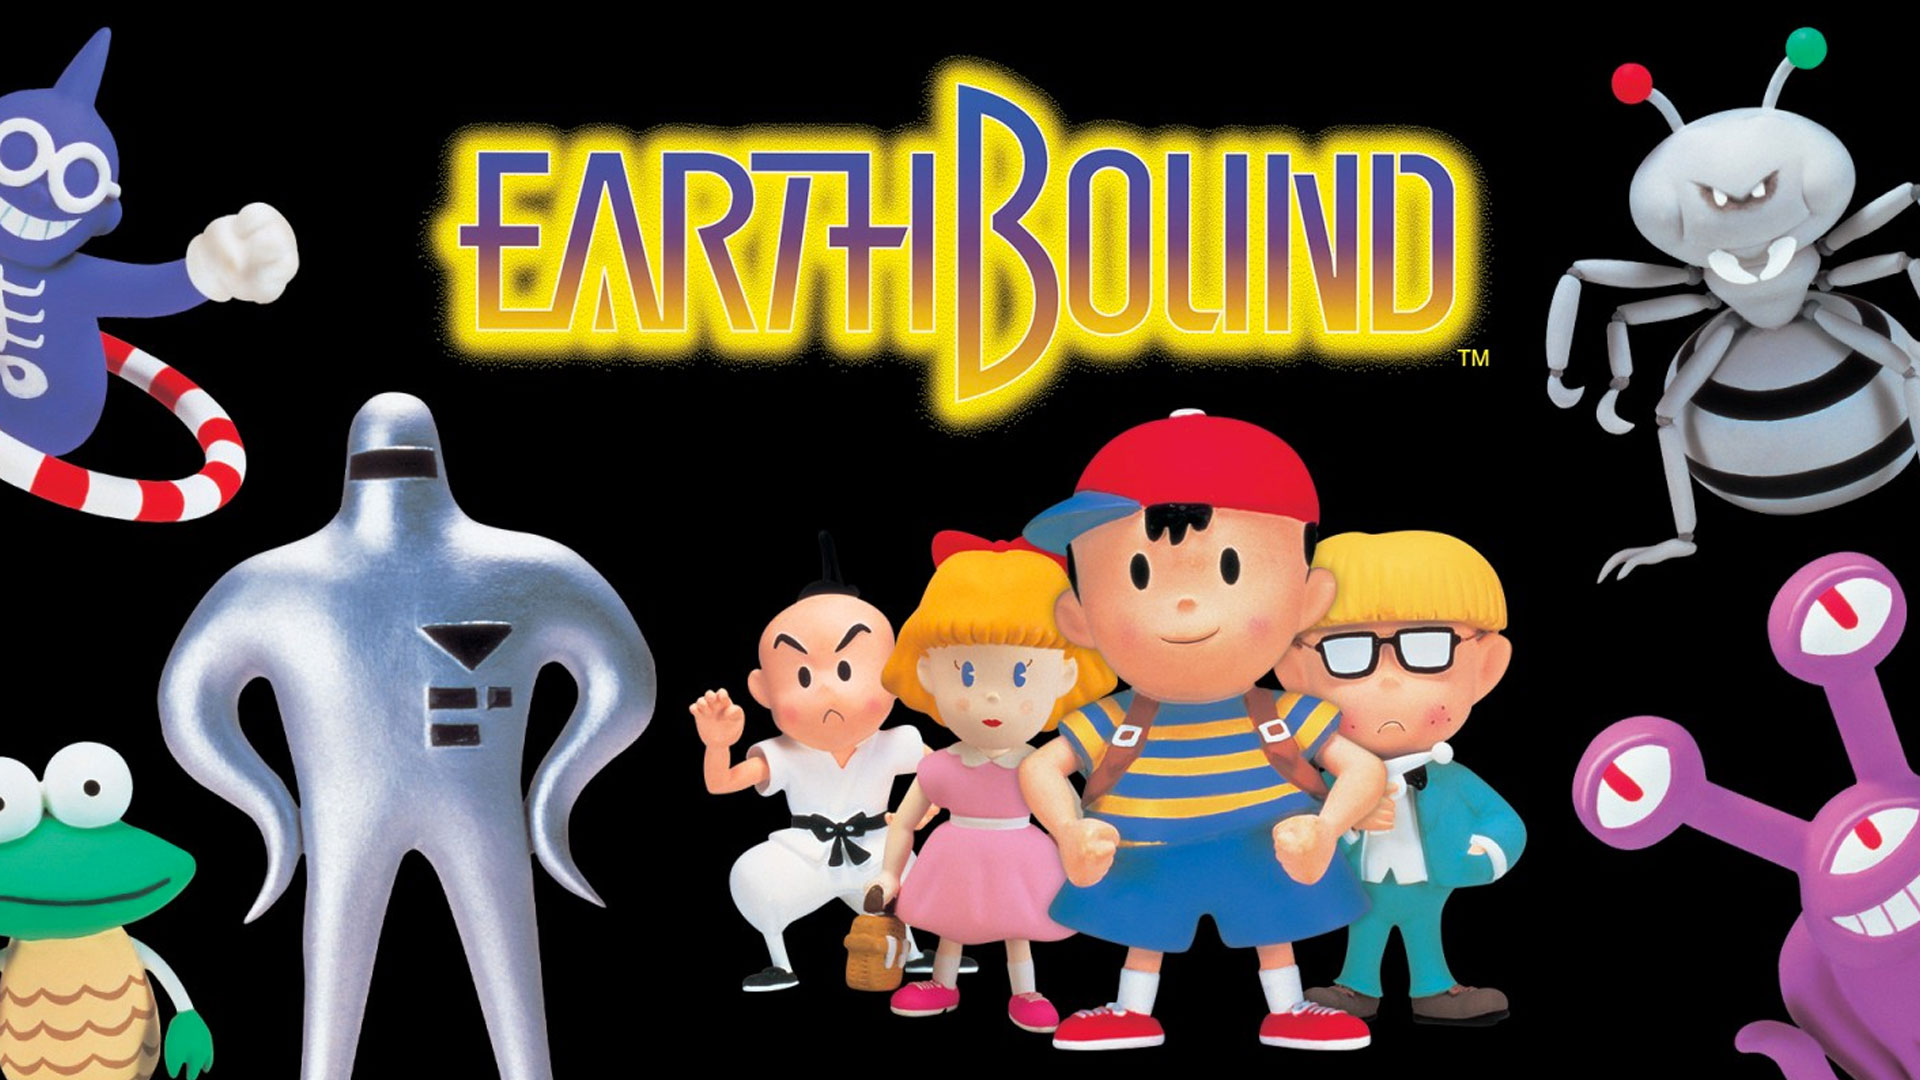 Earthbound игра. Earthbound 3. Mother Earthbound. Earthbound 4.